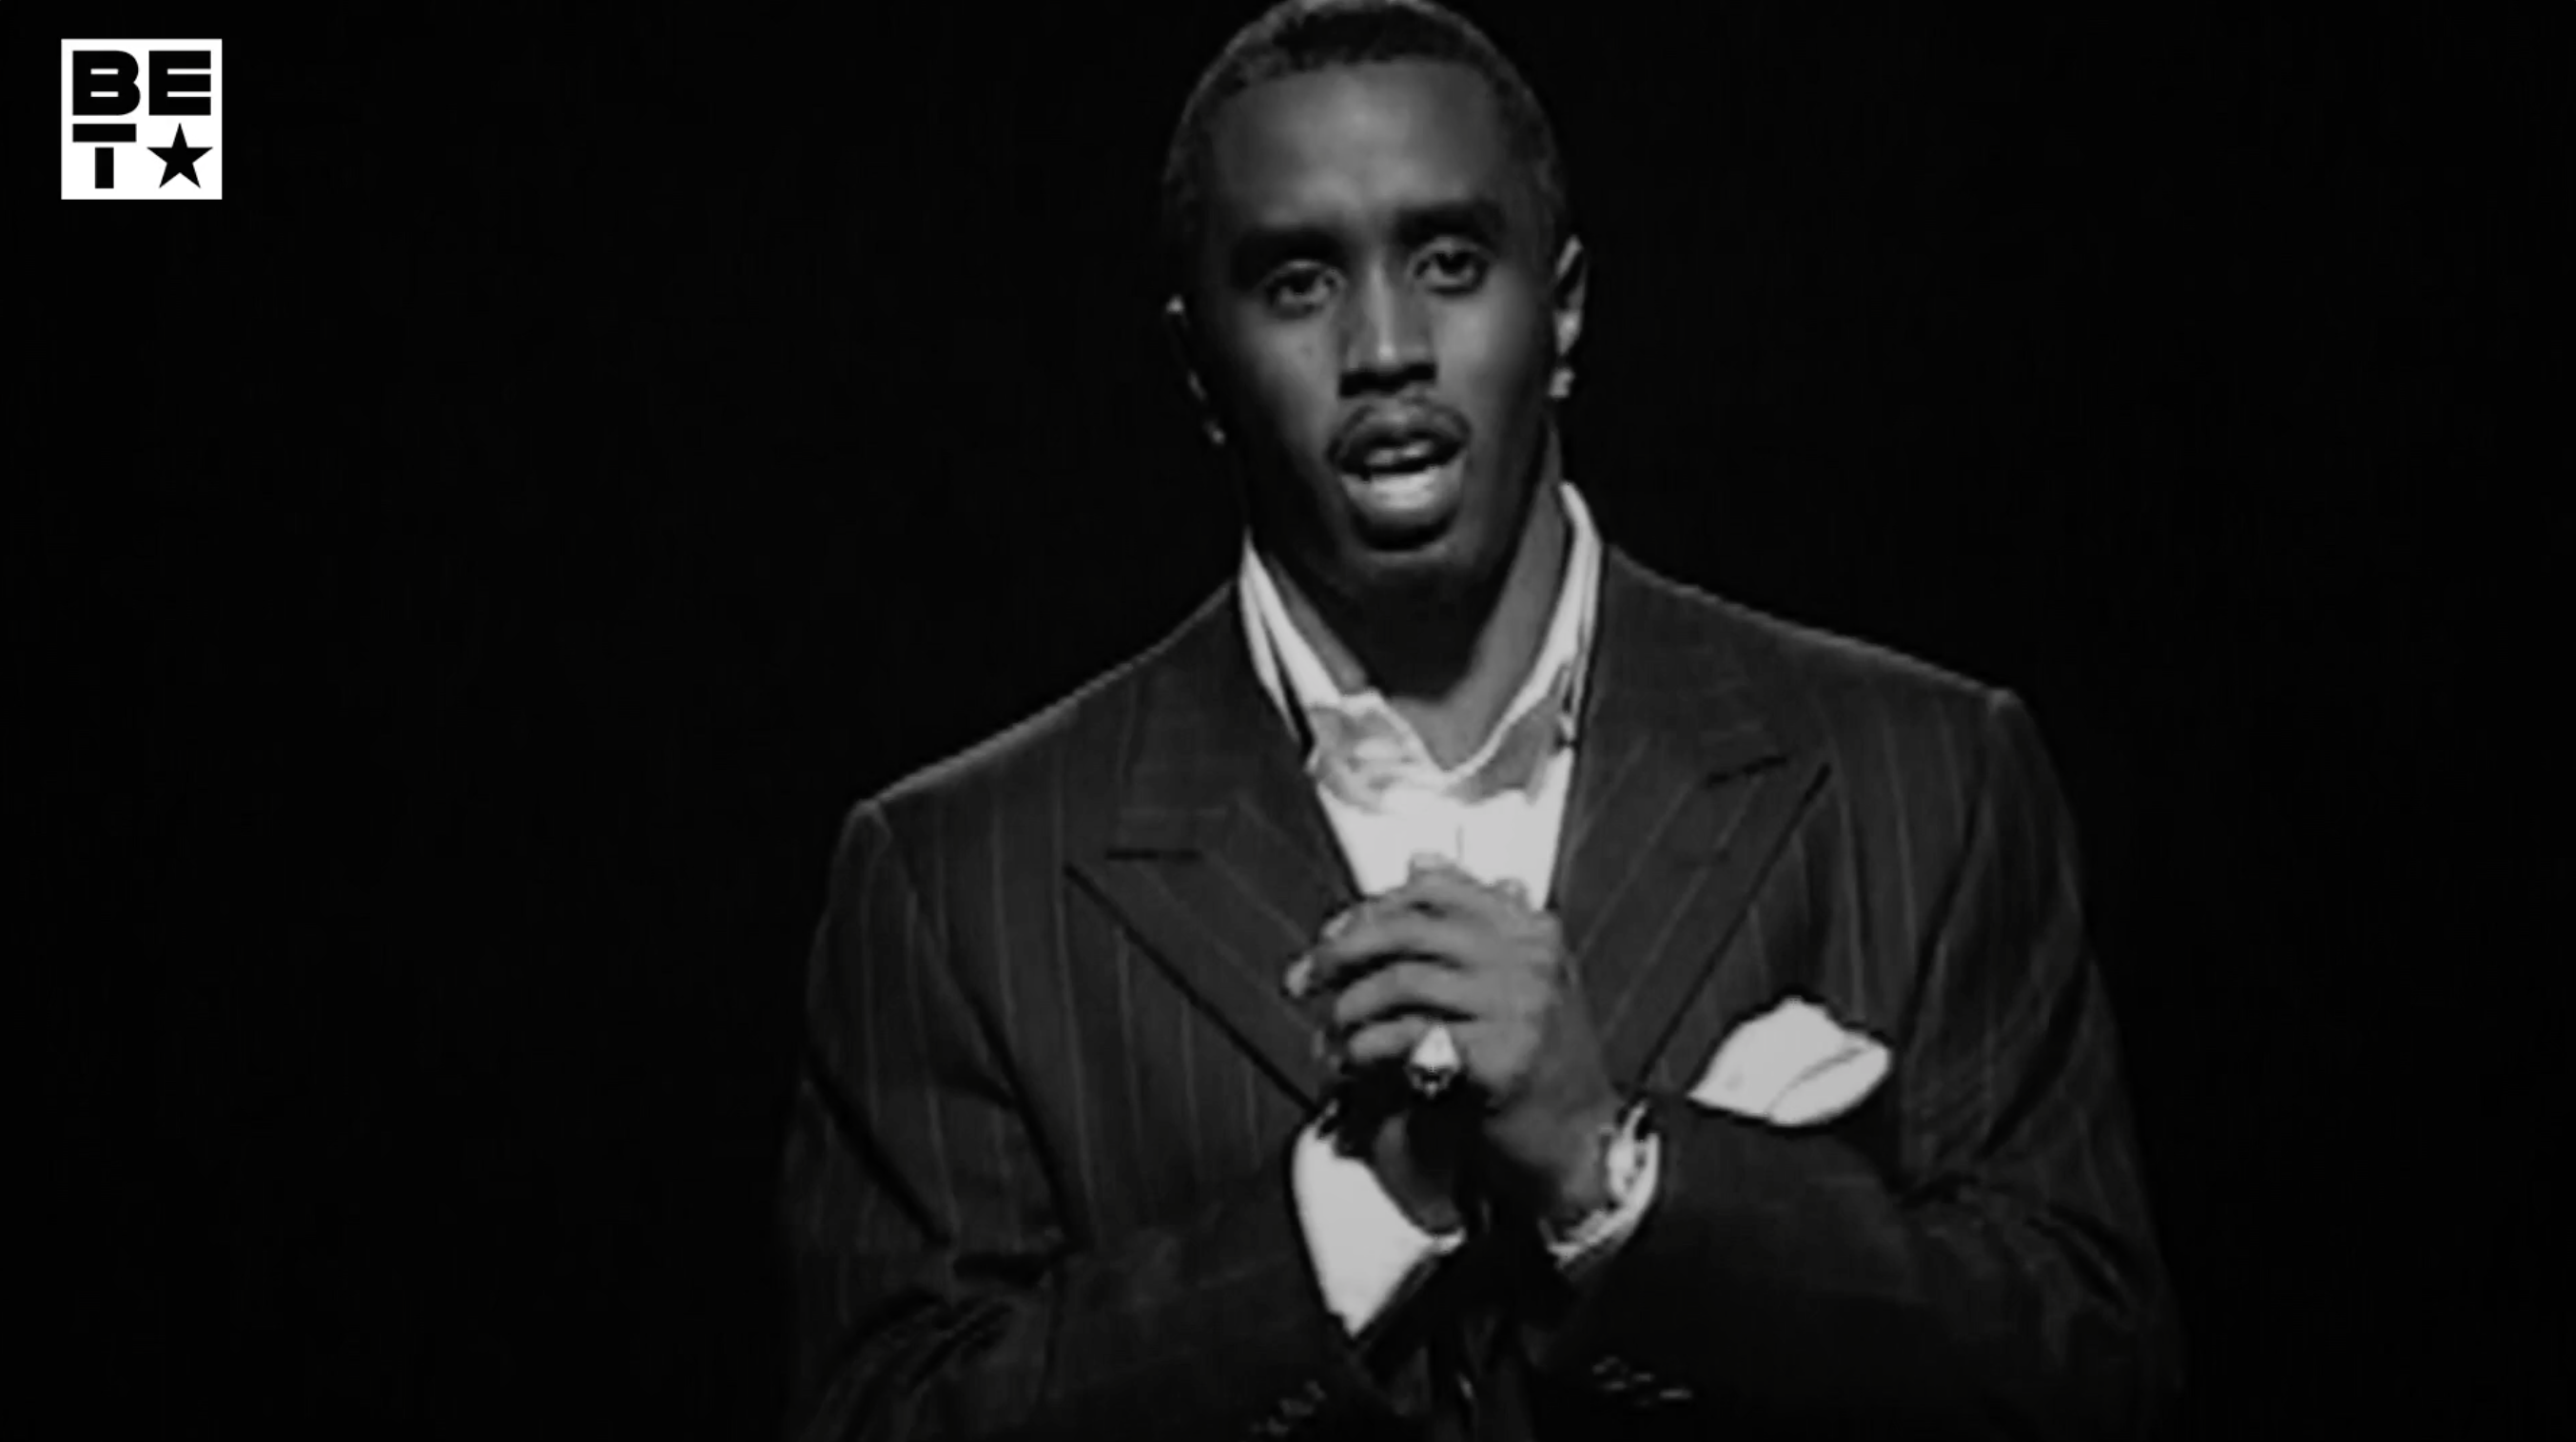 Sean "Diddy" Combs on BET